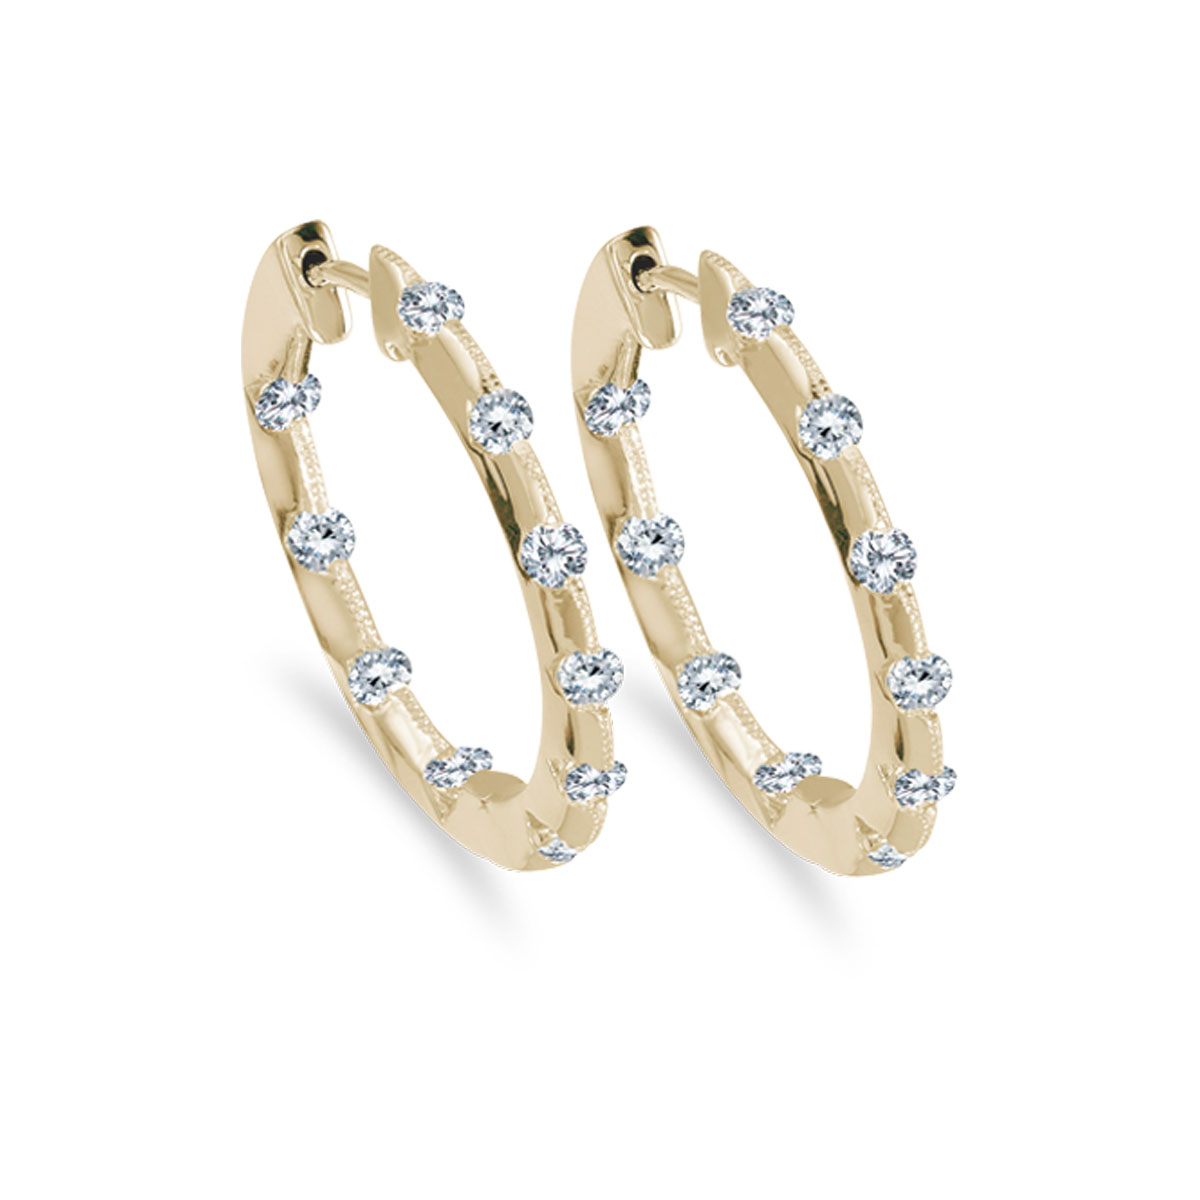 JCX2389: 24 mm diamond inside/outside hoop earrings in beautiful 14k yellow gold. The perfect look for day or night. 1.00 carat genuine diamonds.